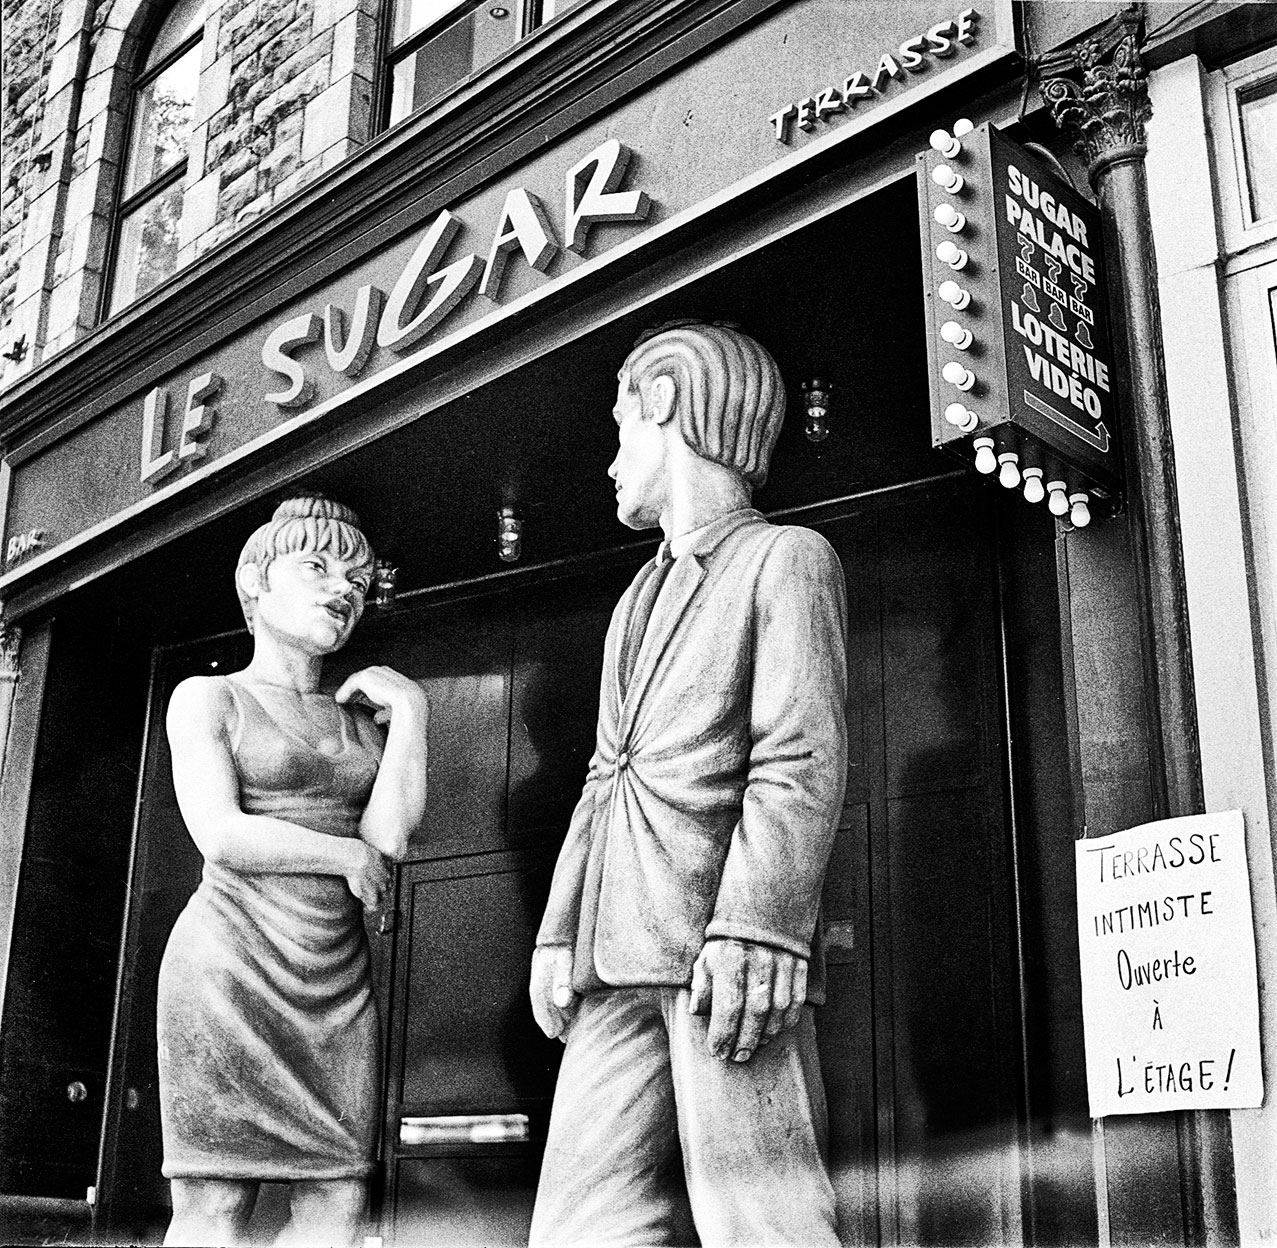 A pair of male and female mannequins pose outside a Montreal bar, 2000.